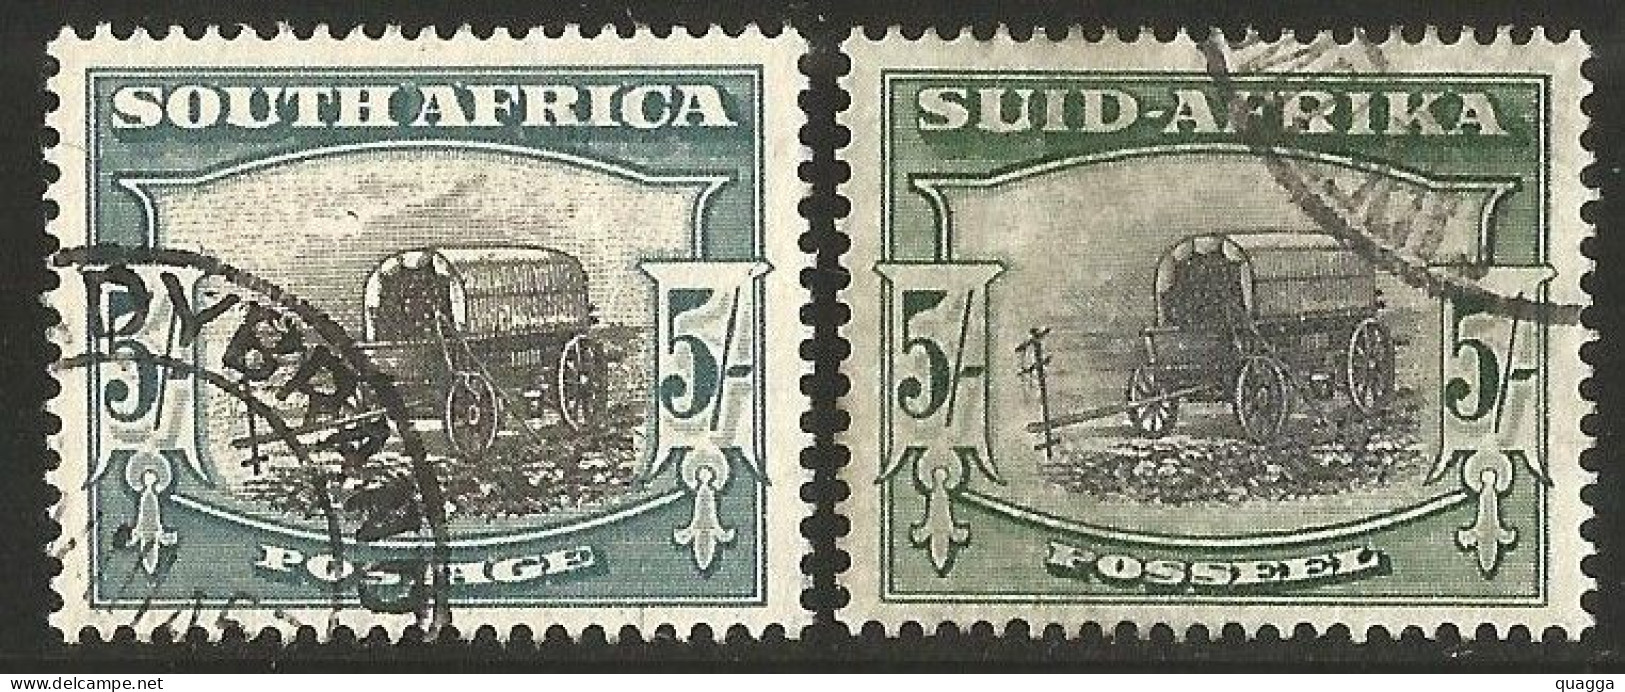 South Africa 1947. 5s SACC 121 + 121a, SG 122 + 122a. - Unused Stamps